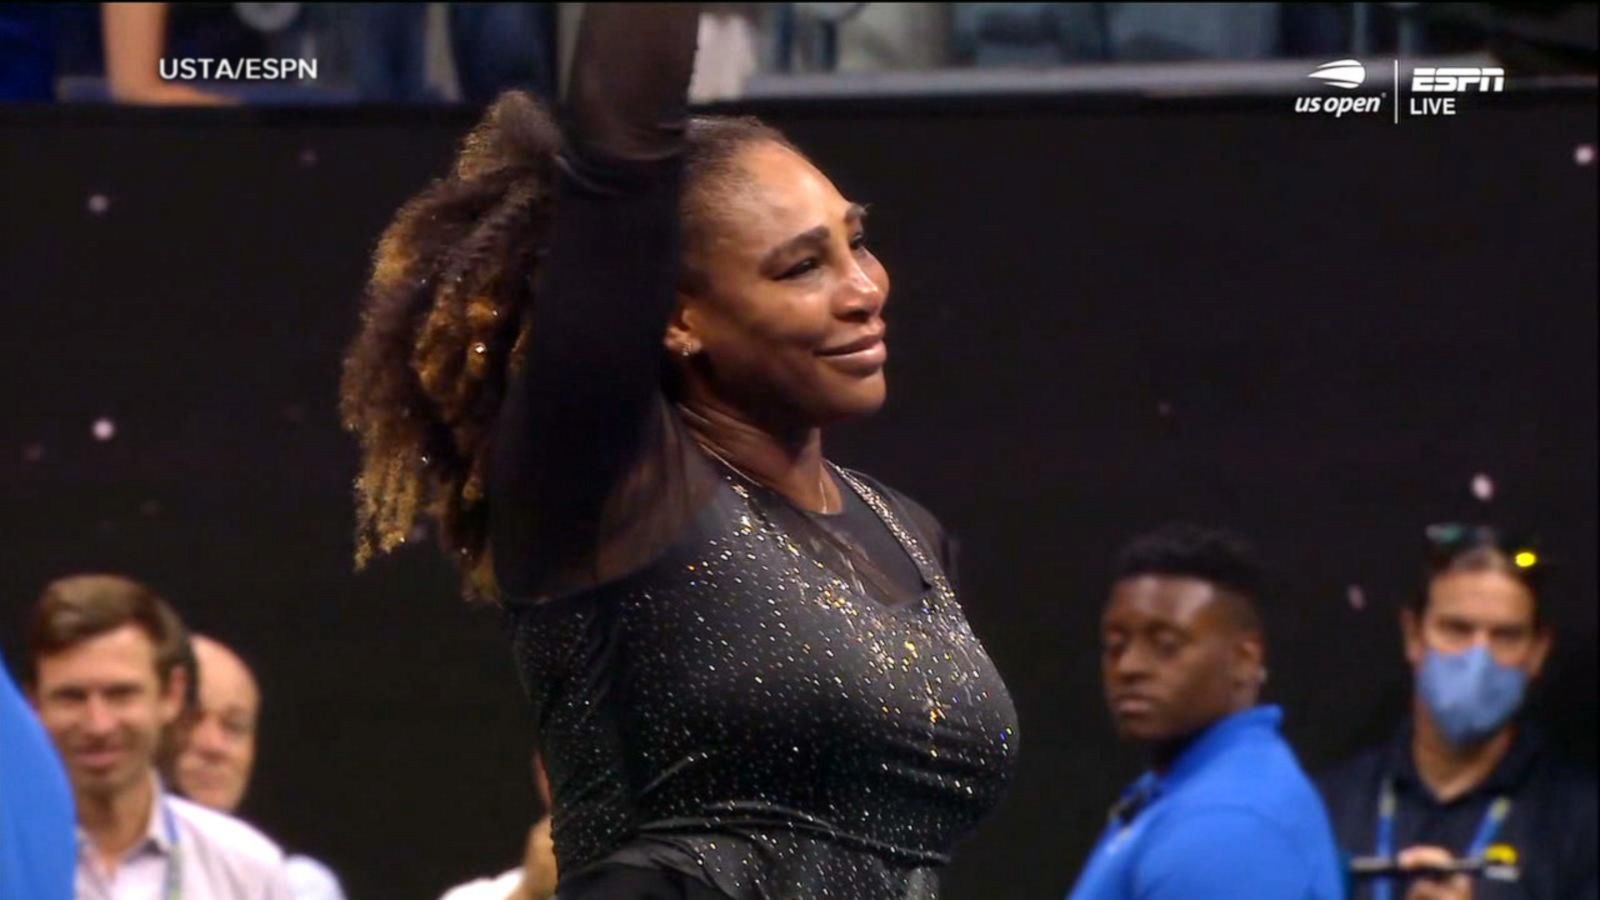 Serena Williams thanks fans at US Open as she likely calls it a career